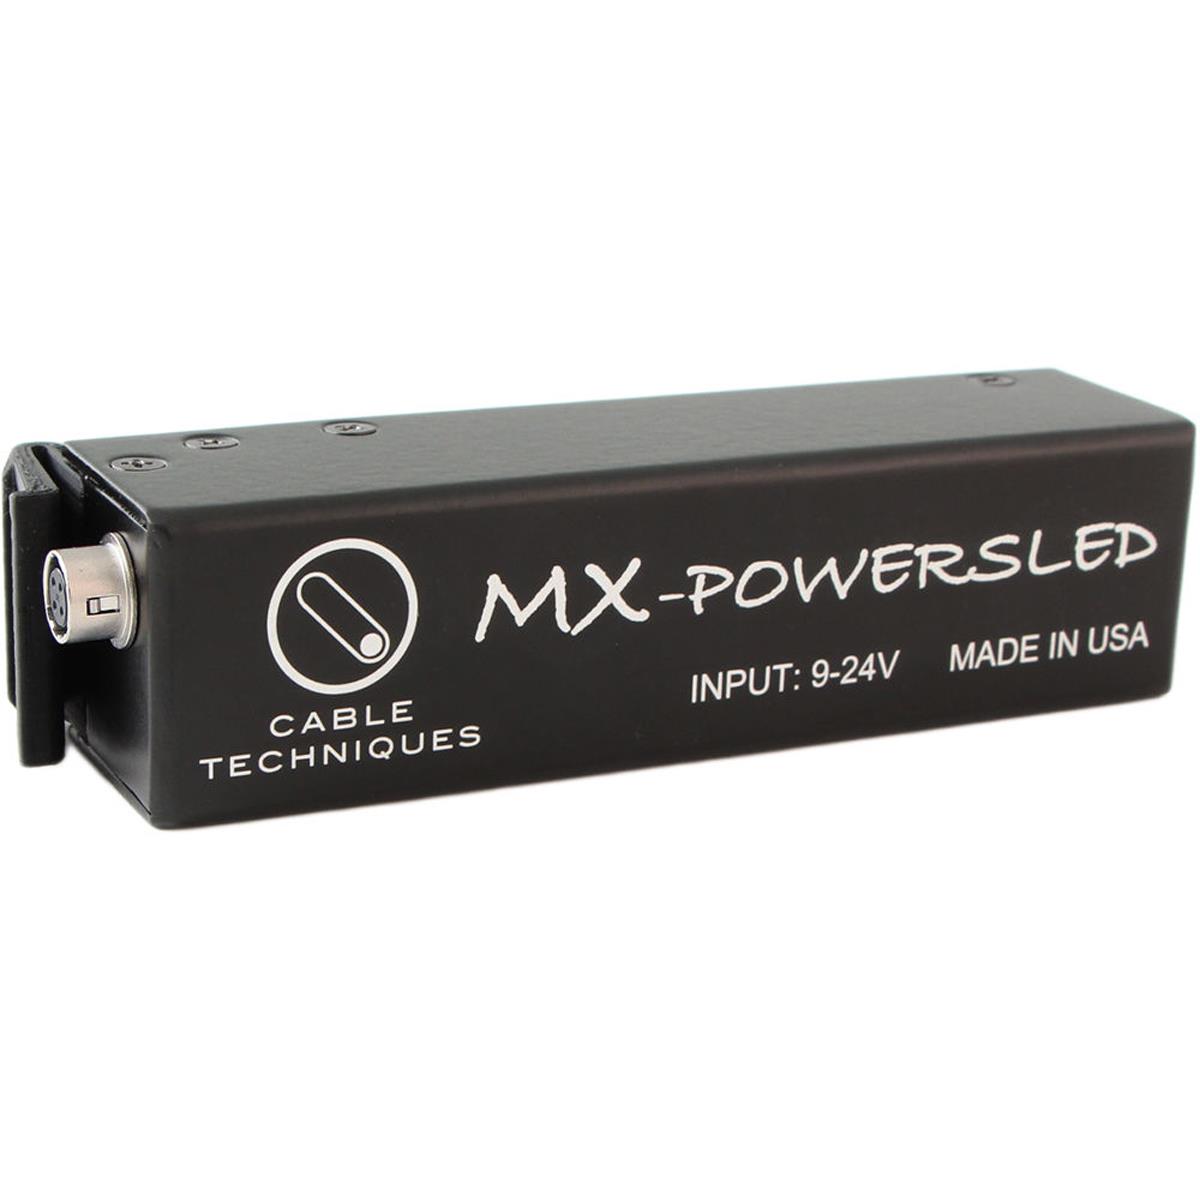 Image of Cable Techniques MX-POWERSLED External DC Power Adapter